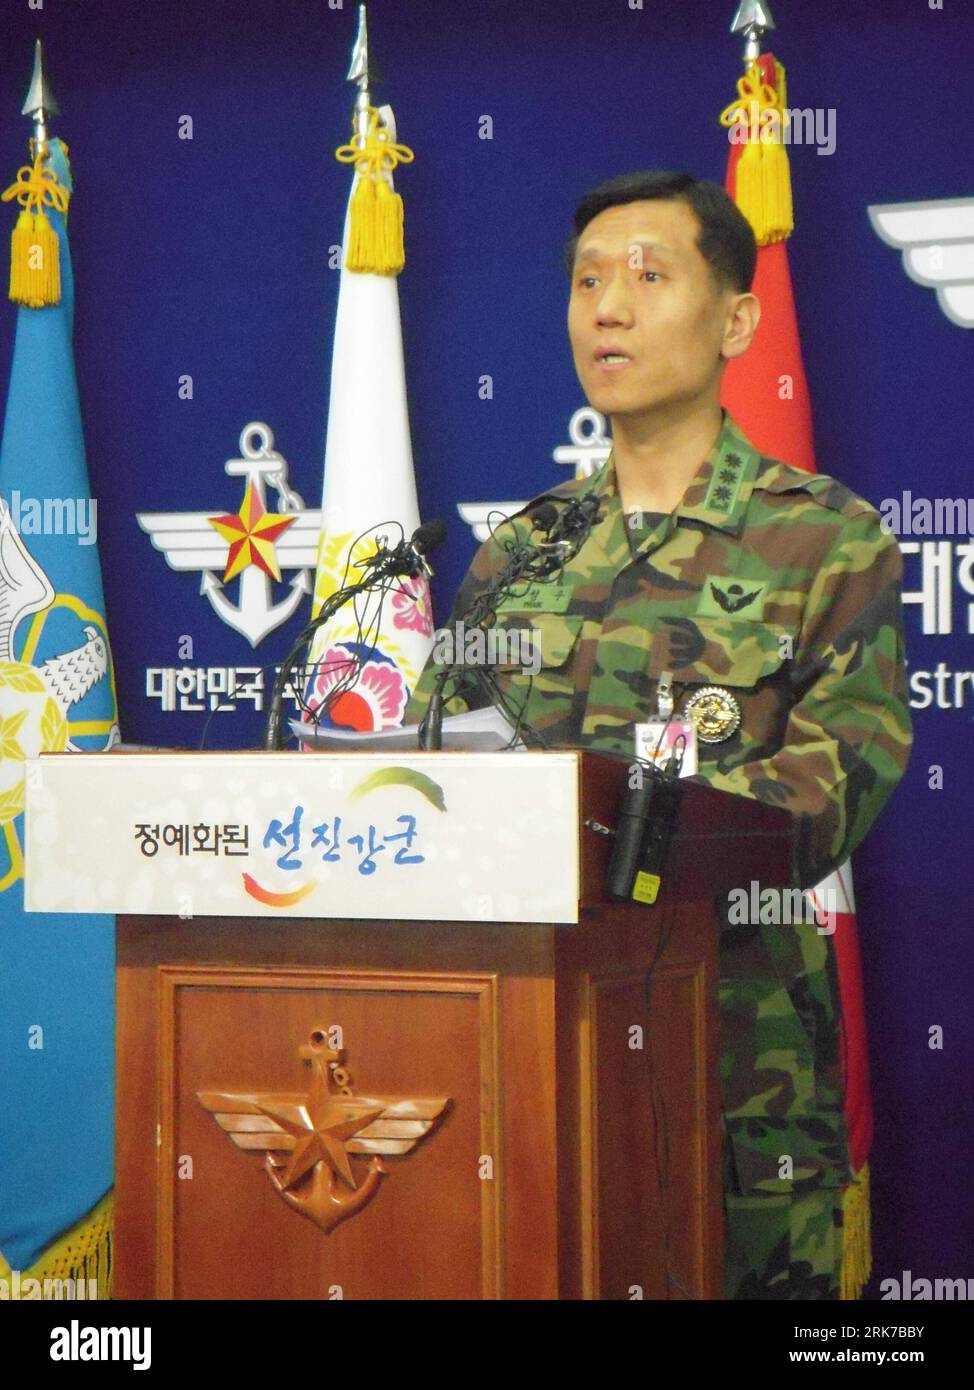 Bildnummer: 53896095  Datum: 27.03.2010  Copyright: imago/Xinhua (100327) -- SEOUL, March 27, 2010 (Xinhua) -- South Korean Joint Chiefs of Staff spokesman Park Sung-woo addresses a press conference in Seoul, South Korea, March 27, 2010. The South Korean naval vessel Cheonan with 104 crew members onboard sank into waters off the west coast of the Korean Peninsula late Friday due to an unknown cause, local media reported, citing naval officials. (Xinhua/Newsis)(axy) (4)SOUTH KOREA-NAVAL VESSEL-SINK PUBLICATIONxNOTxINxCHN People Politik kbdig xsk 2010 hoch o0 Südkorea // Nordkorea Torpedo Angrif Stock Photo